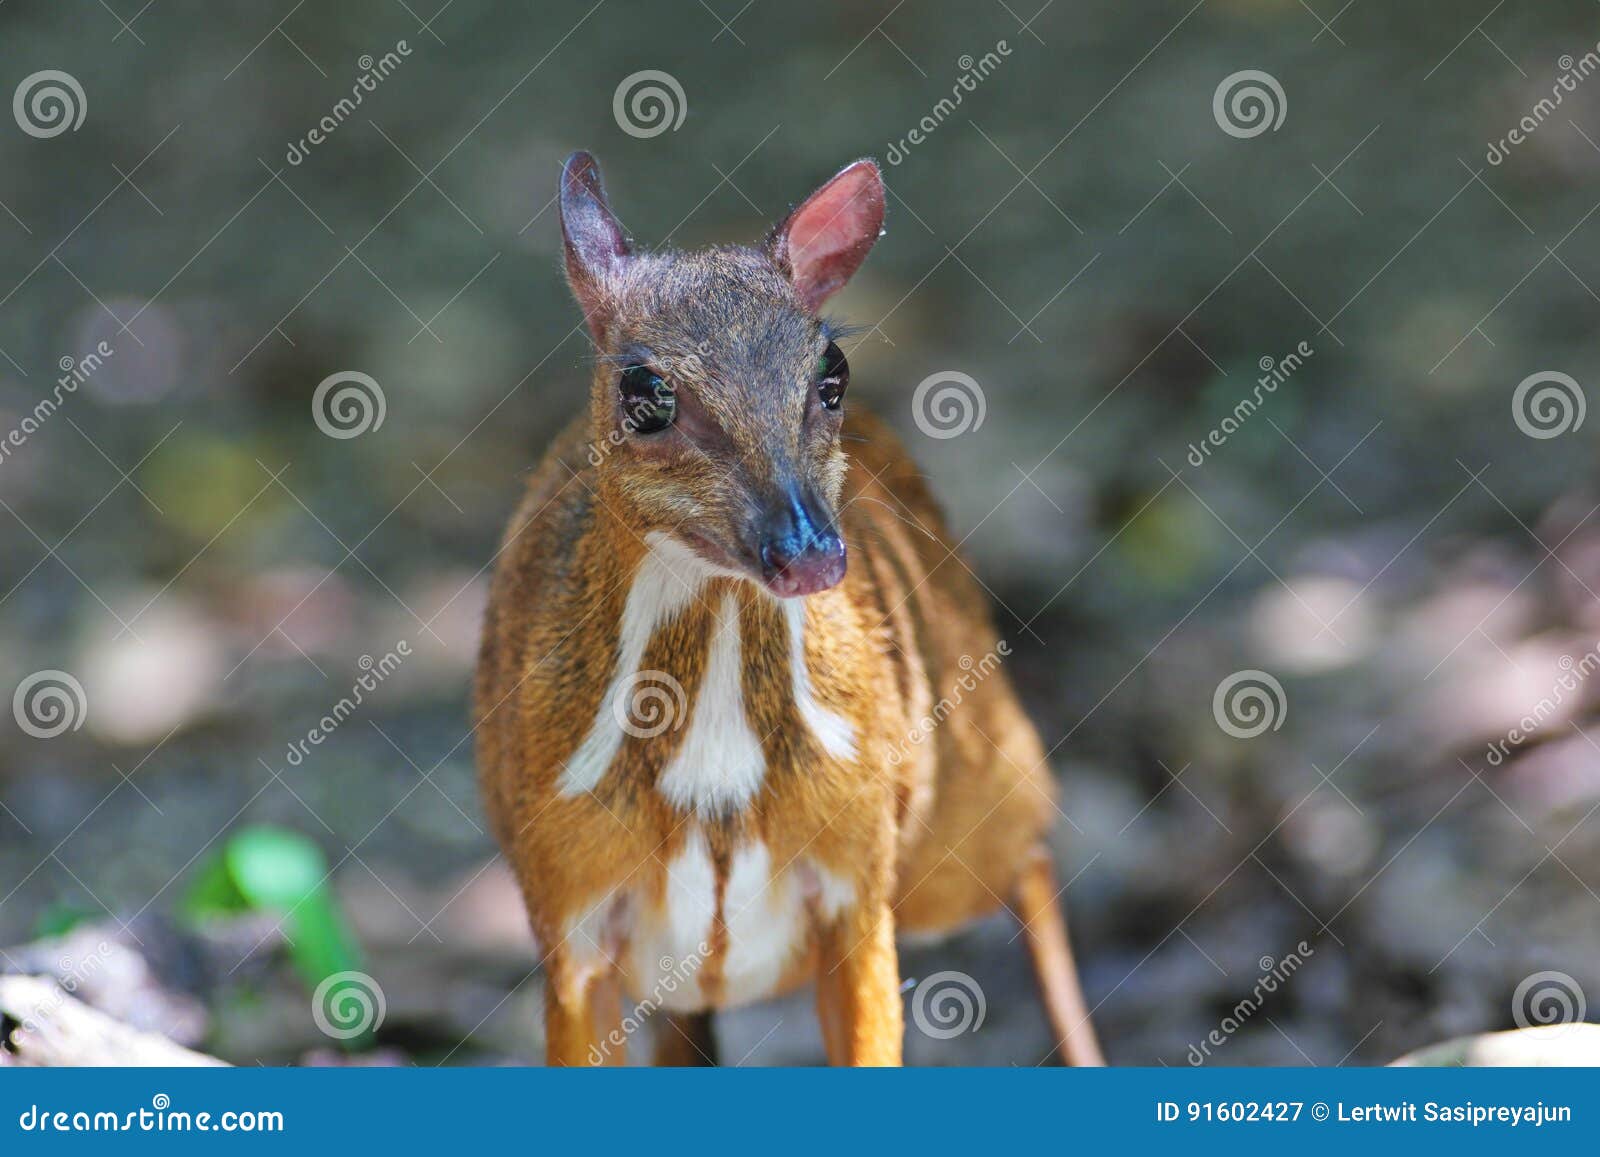 mouse deer; small ungulates